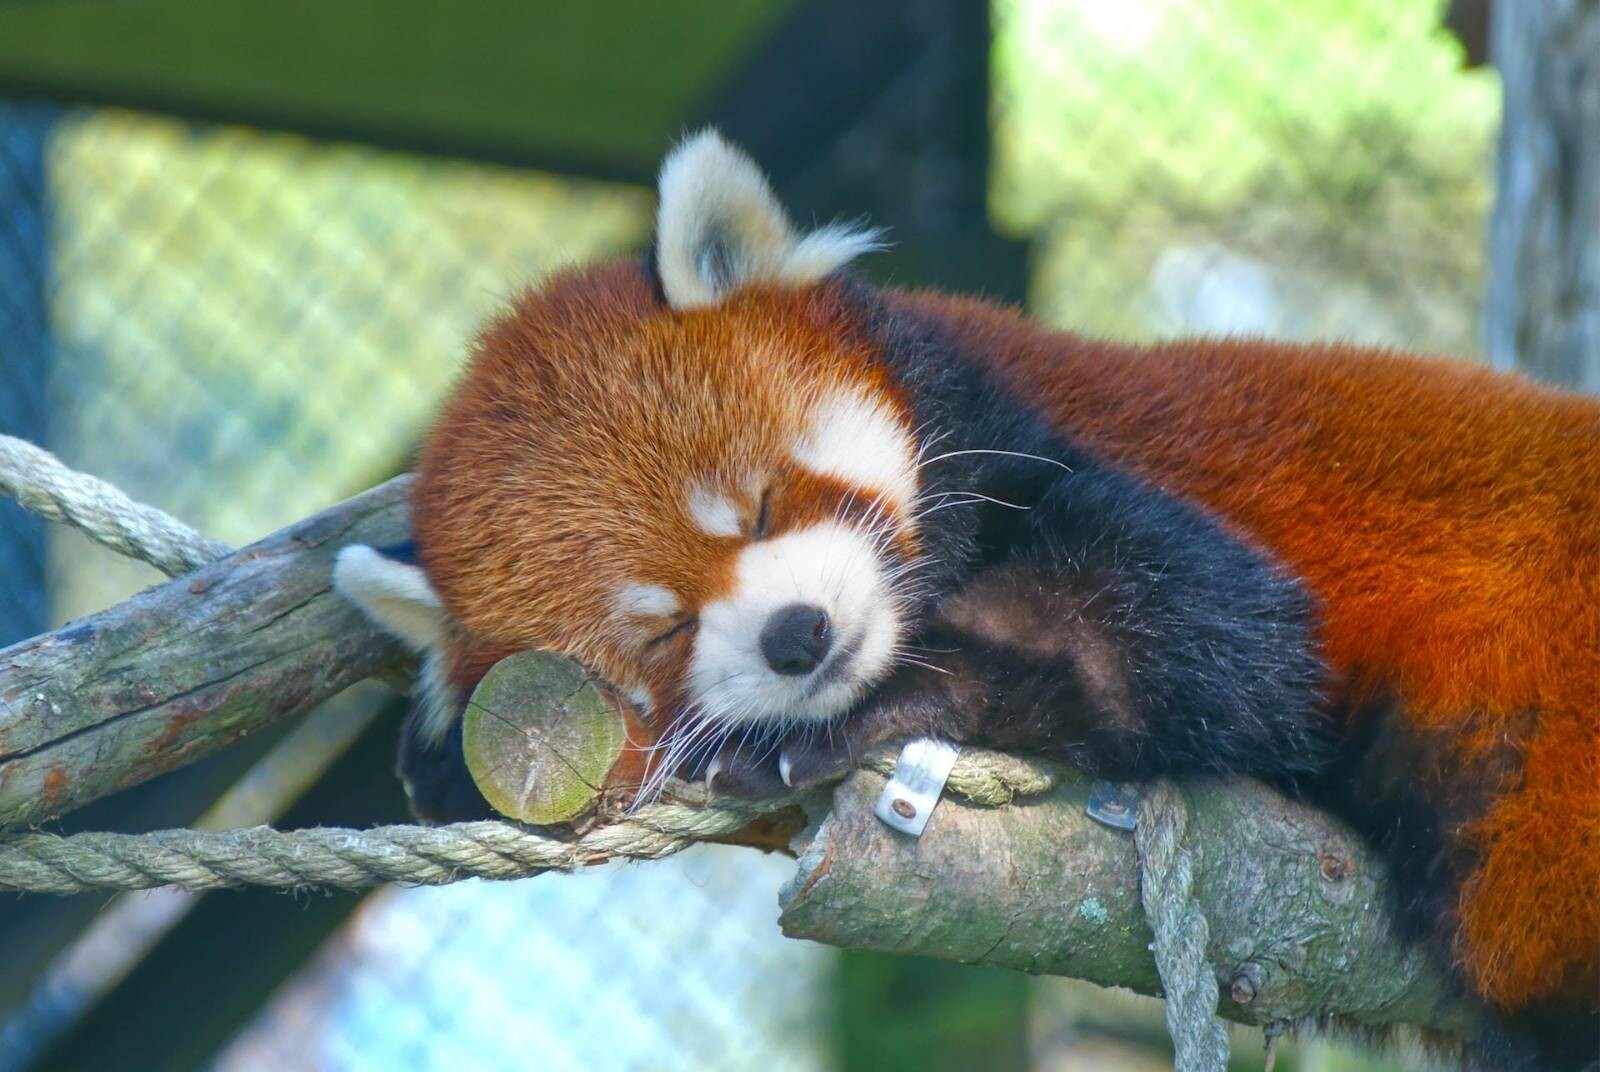 A Red Panda sleeps peacefully on a branch.